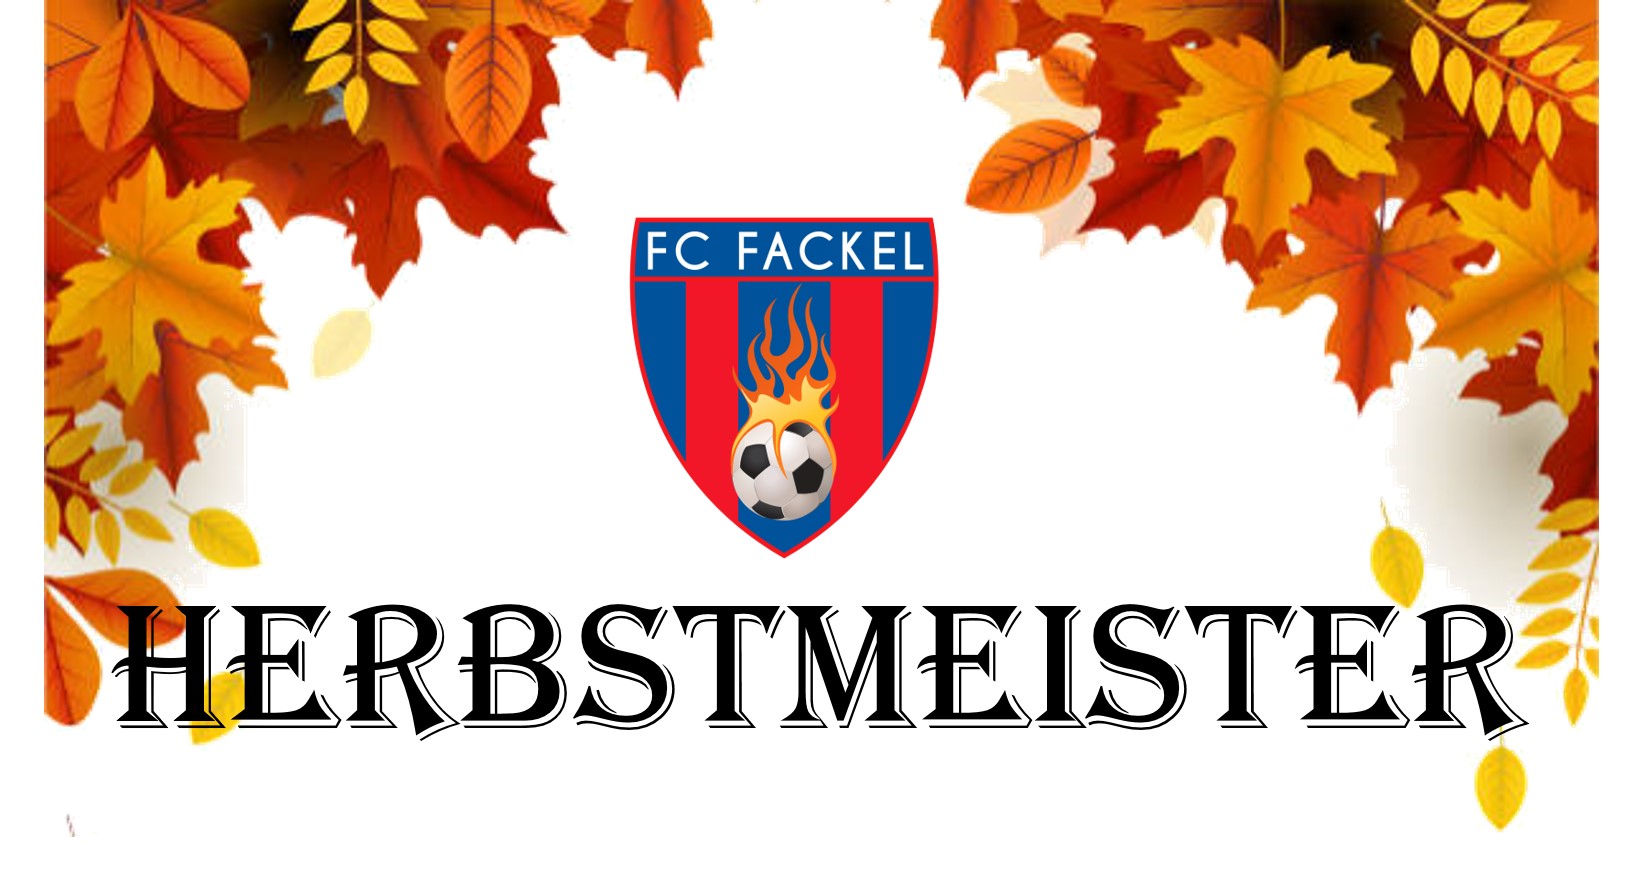 Herbstmeister